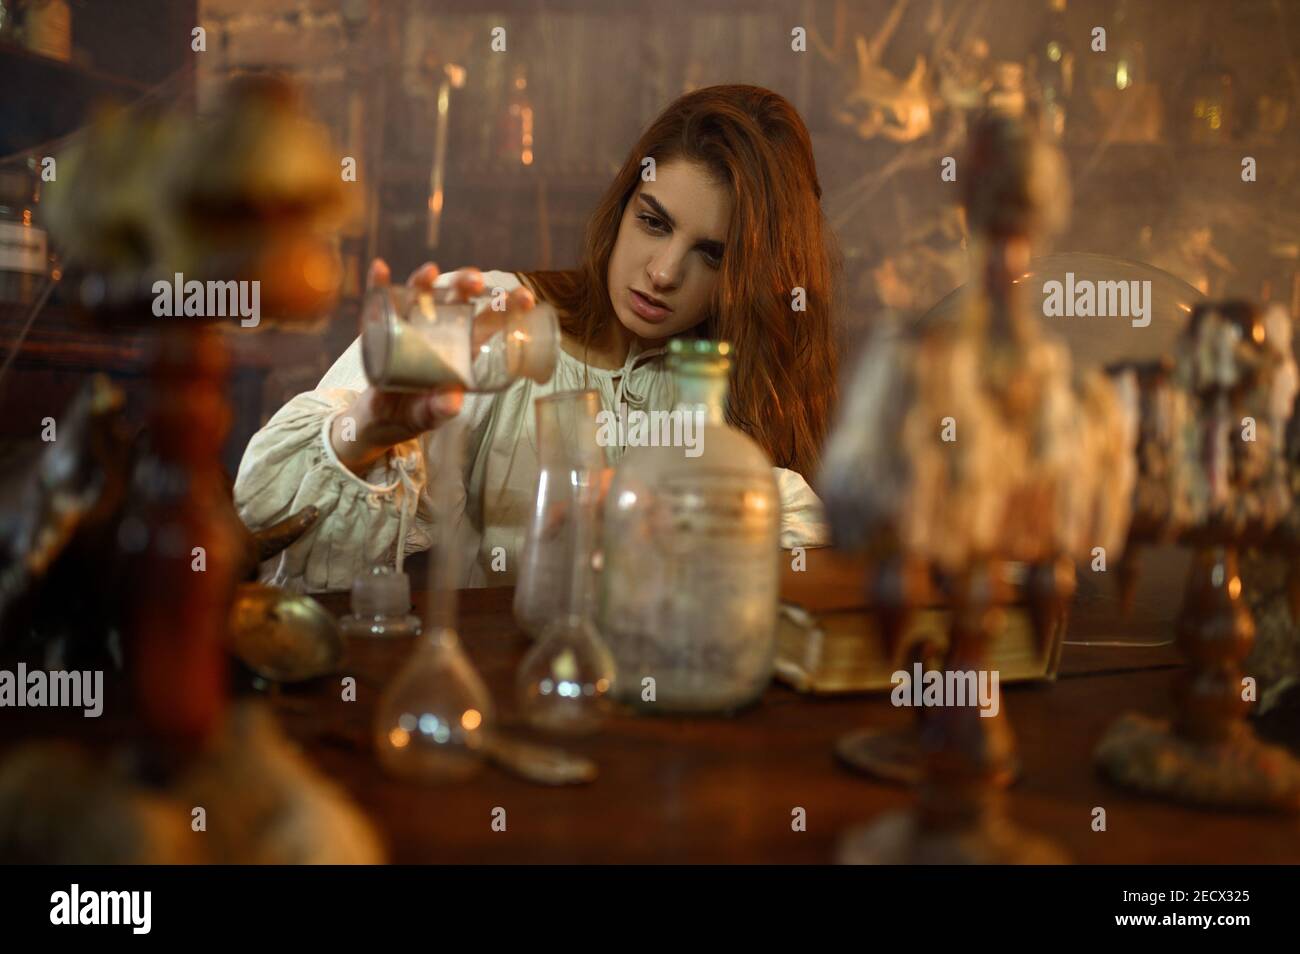 Demonic woman mixes potions, demons casting out Stock Photo